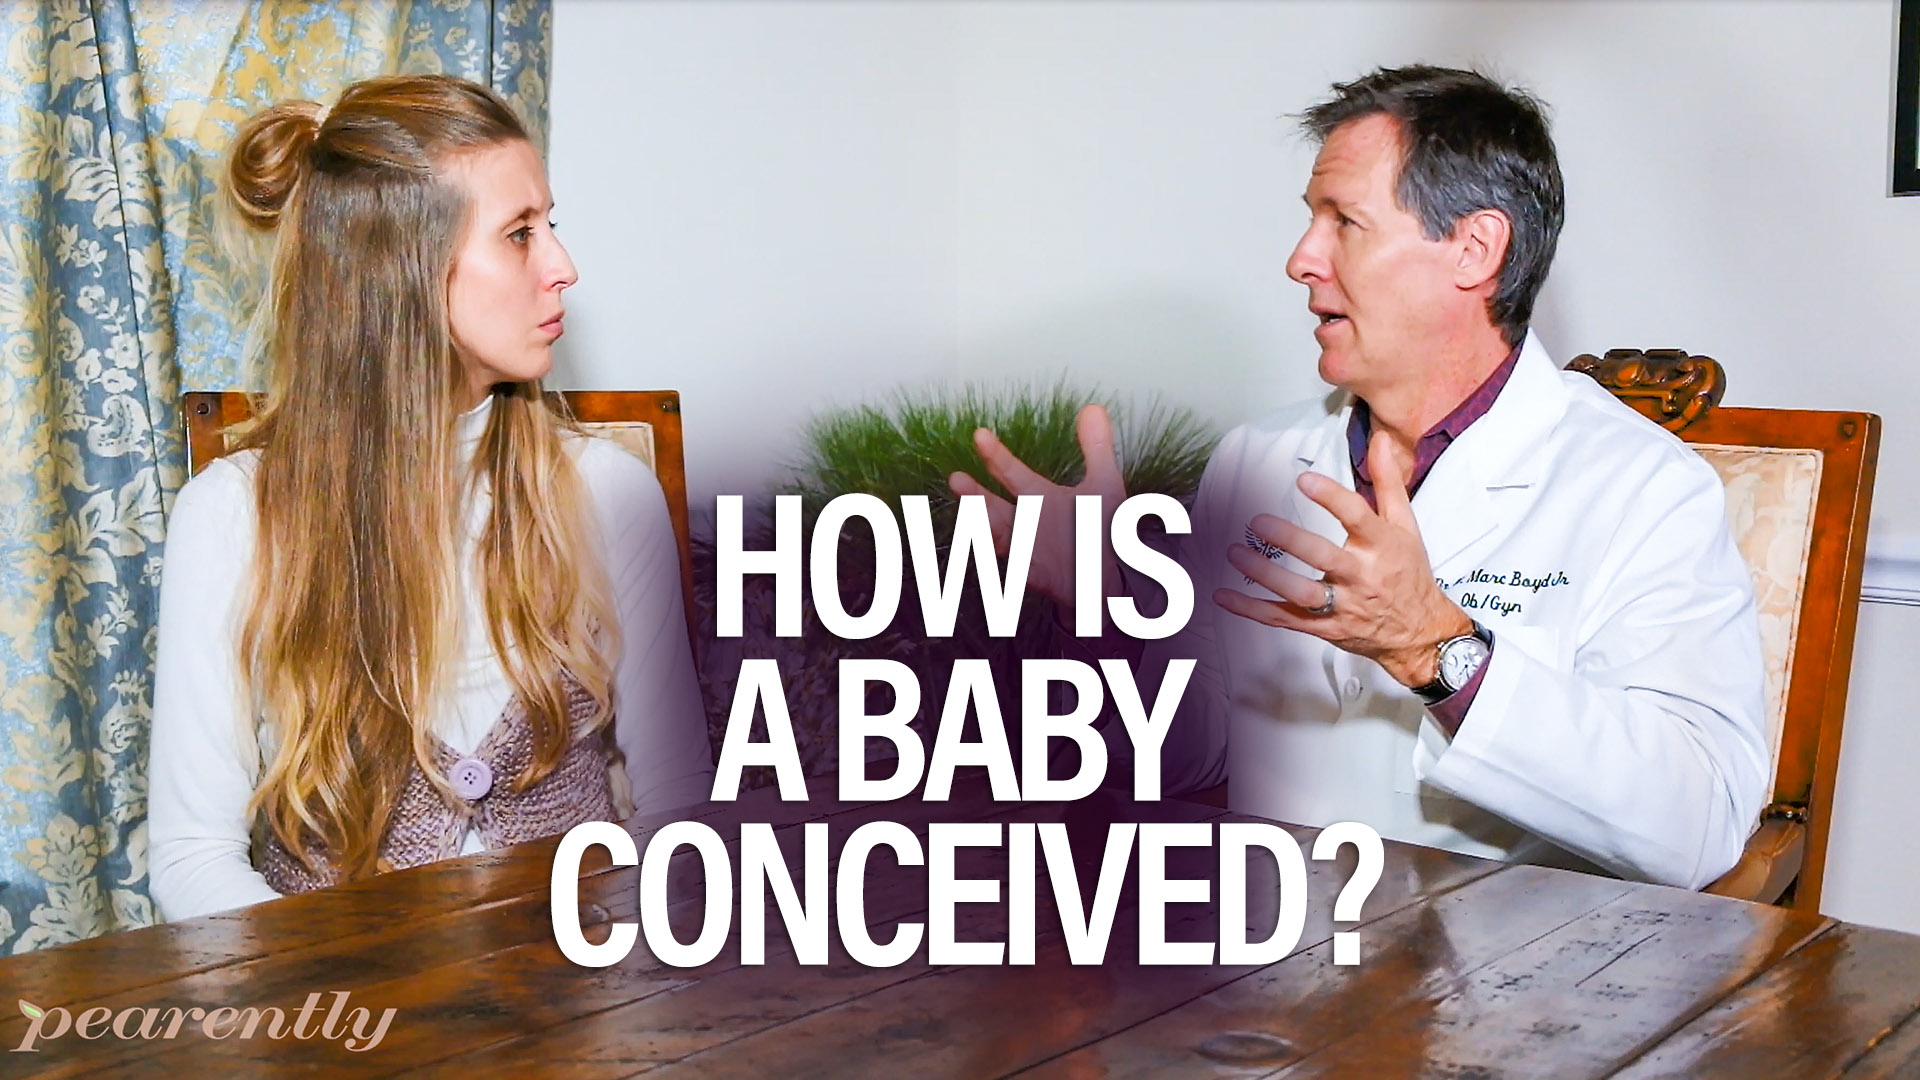 How are Babies Conceived? - The Process of Conceiving a Baby